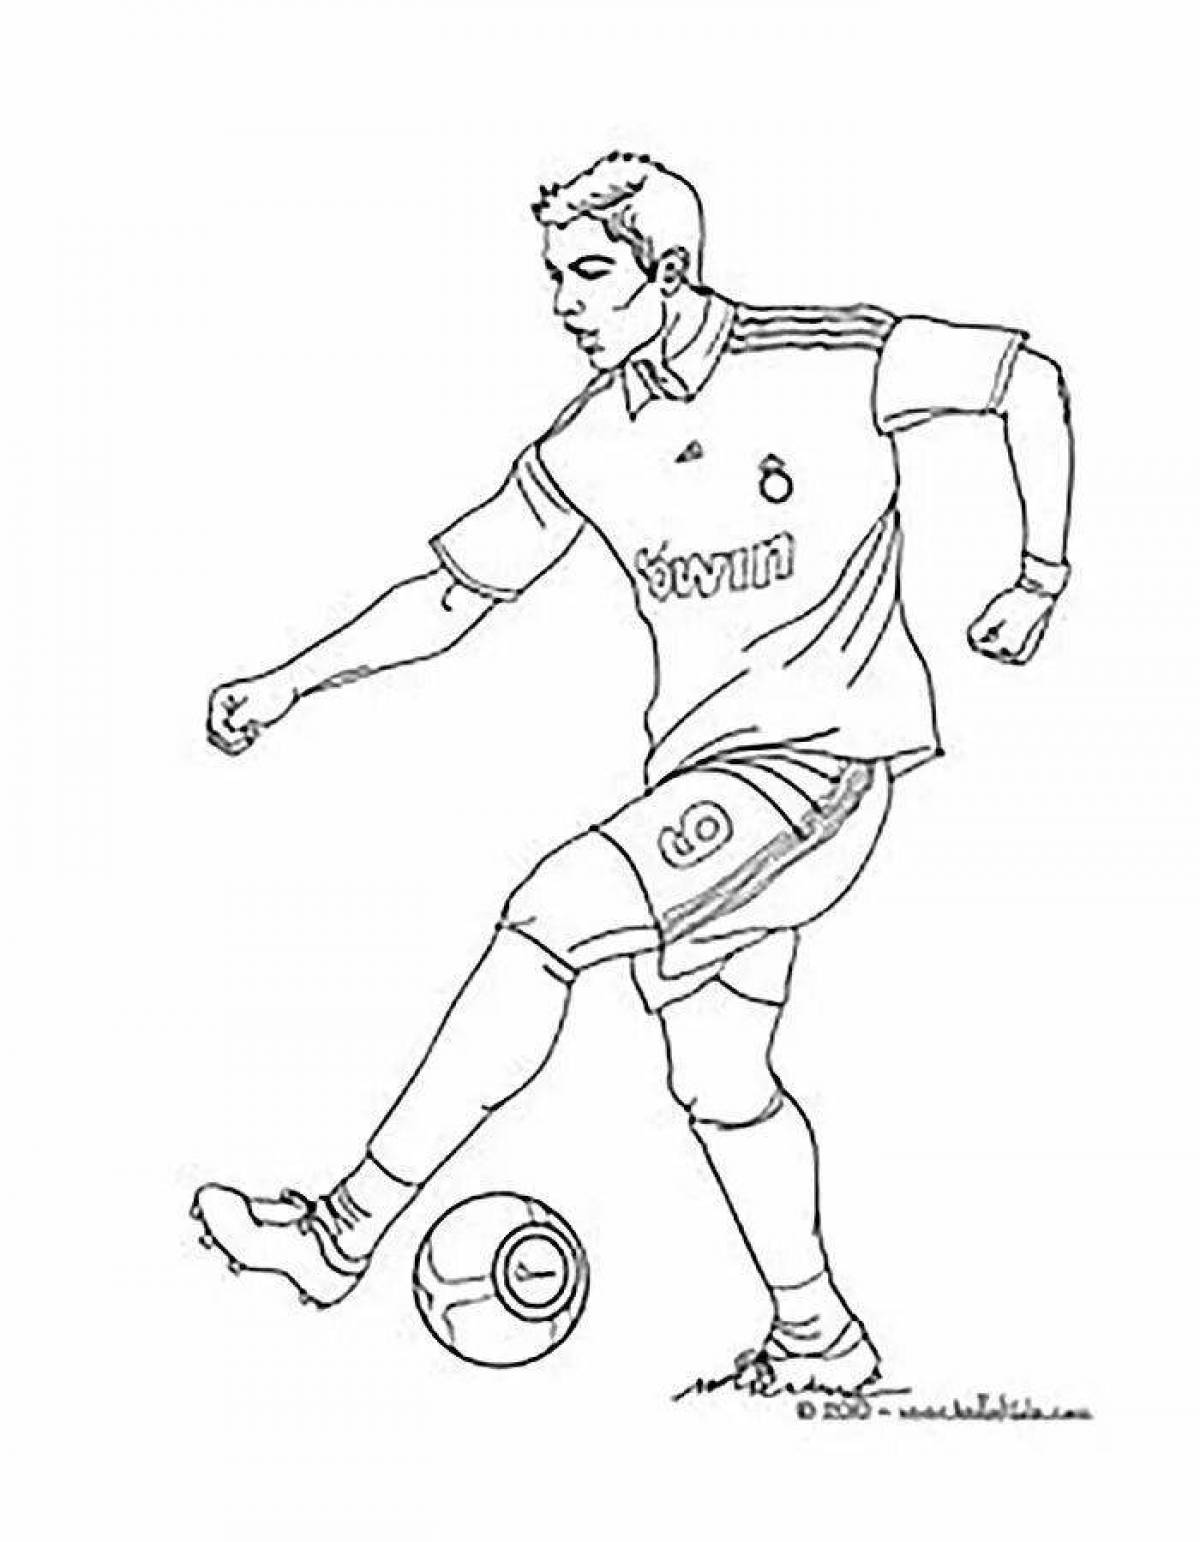 Coloring amazing football for boys